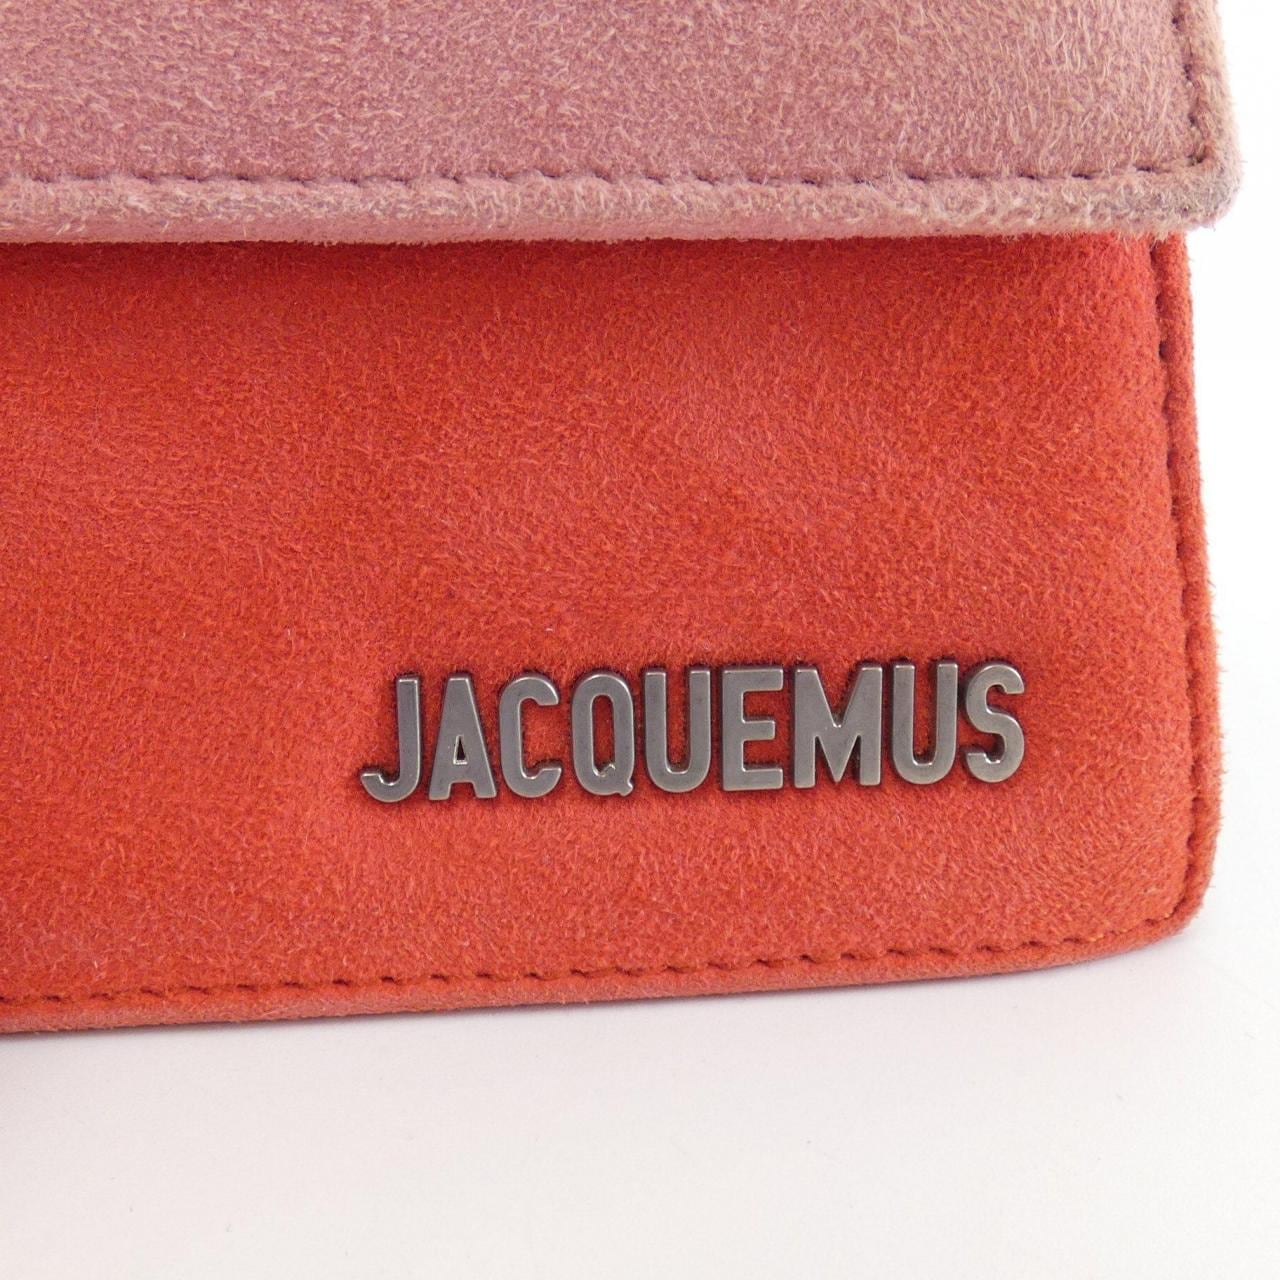 JACQUEMUS包